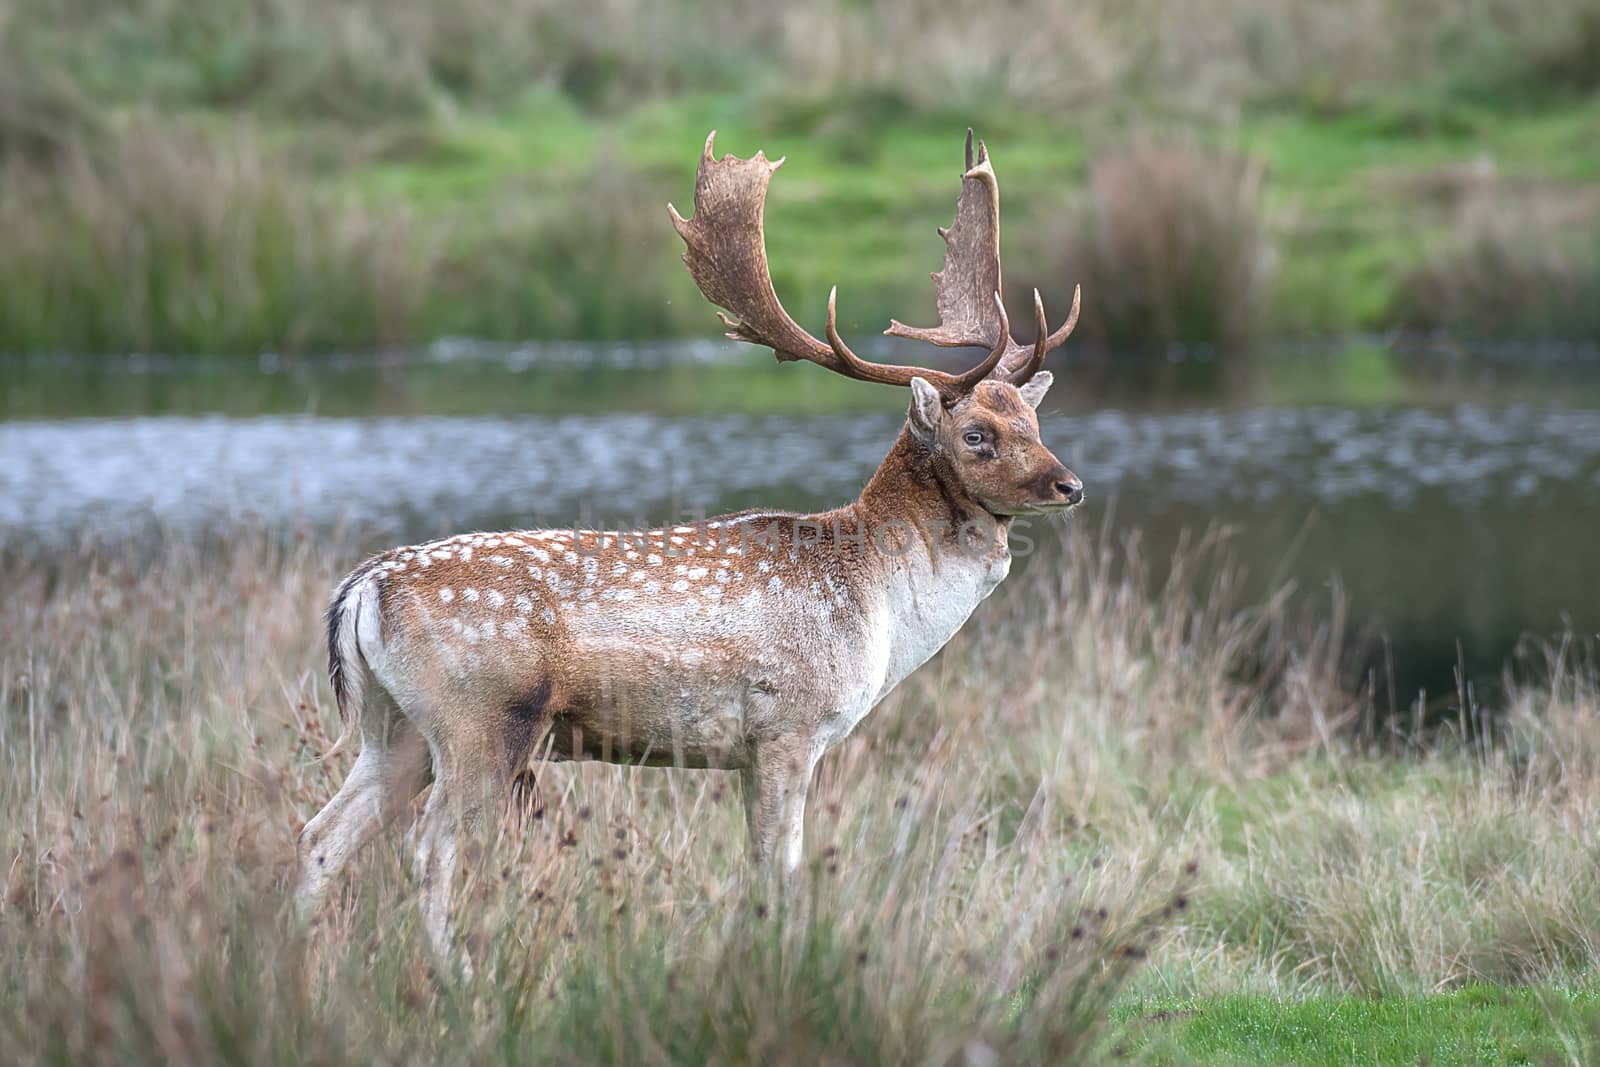 A standing full length portrait of a fallow deer stag looking proud on grass with a lake in the background